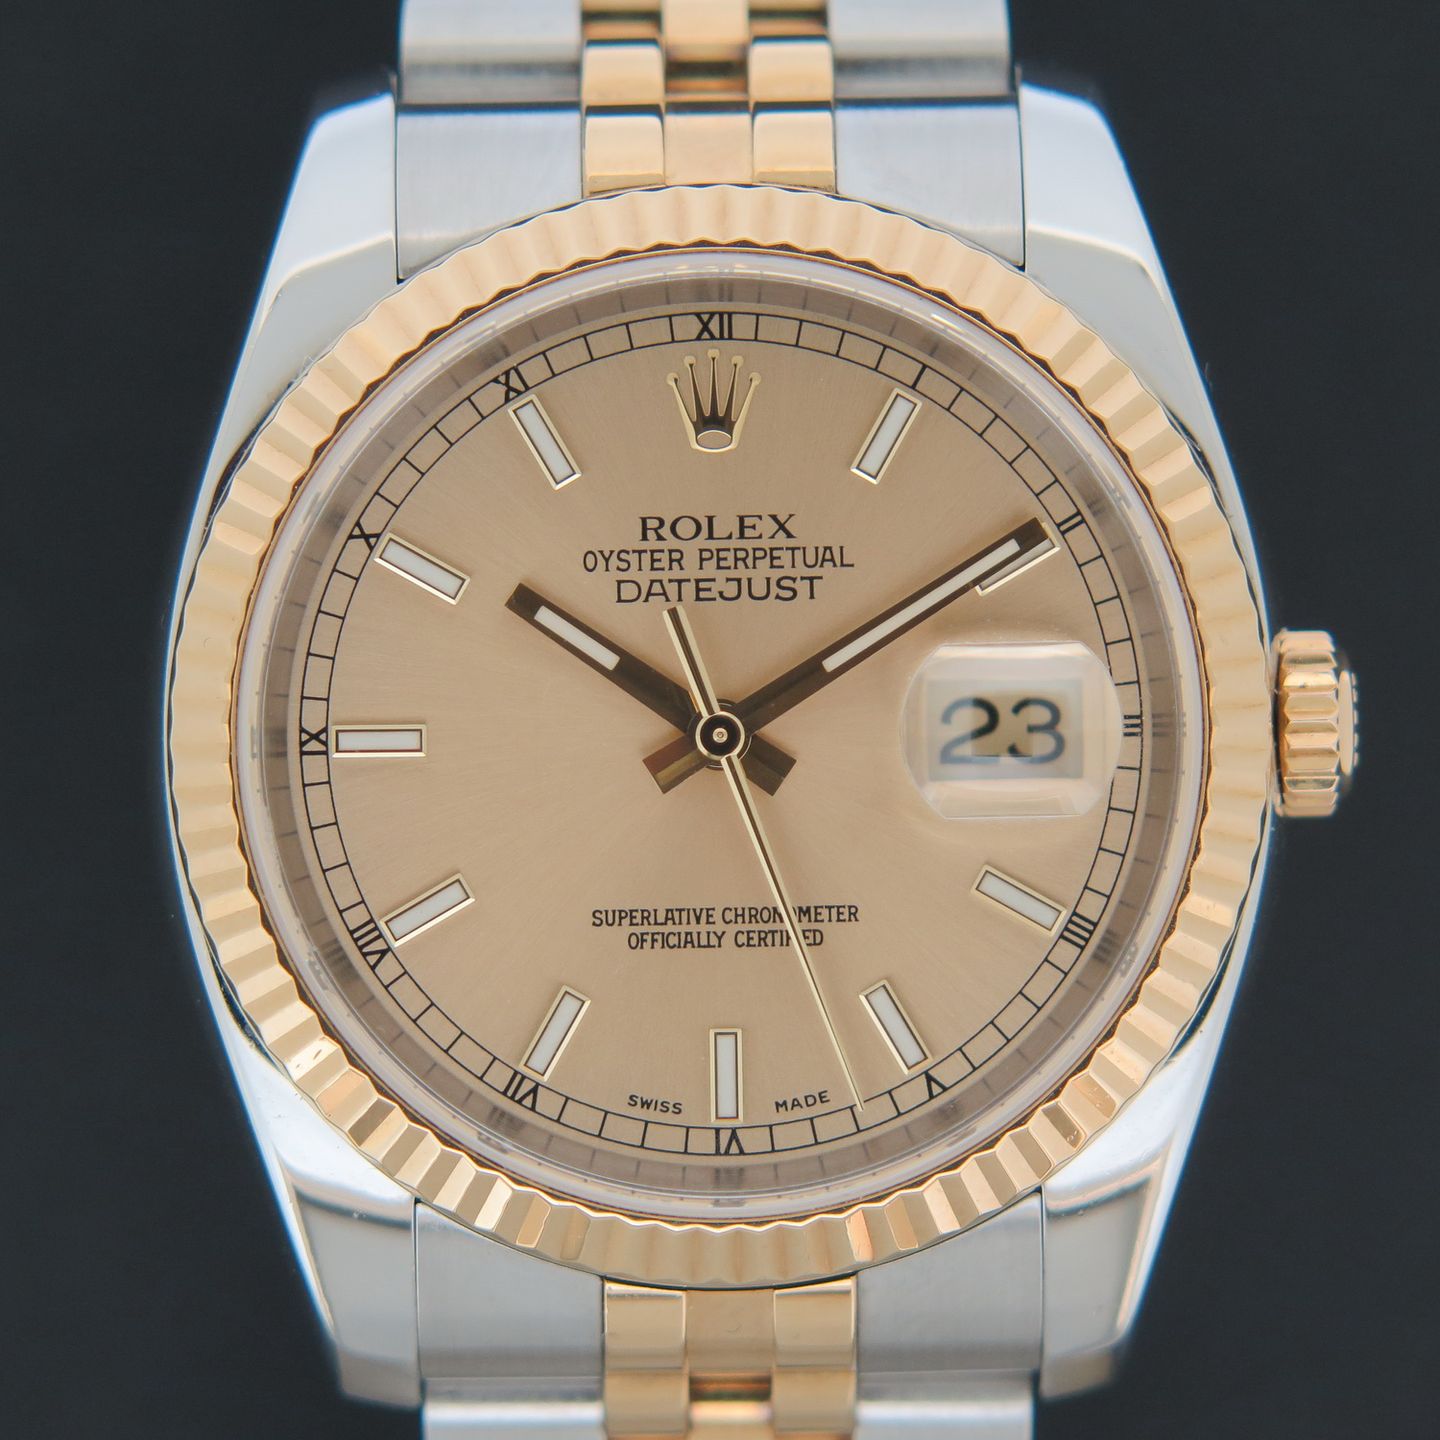 Rolex Datejust 36 116233 (2004) - 36mm Goud/Staal (2/4)